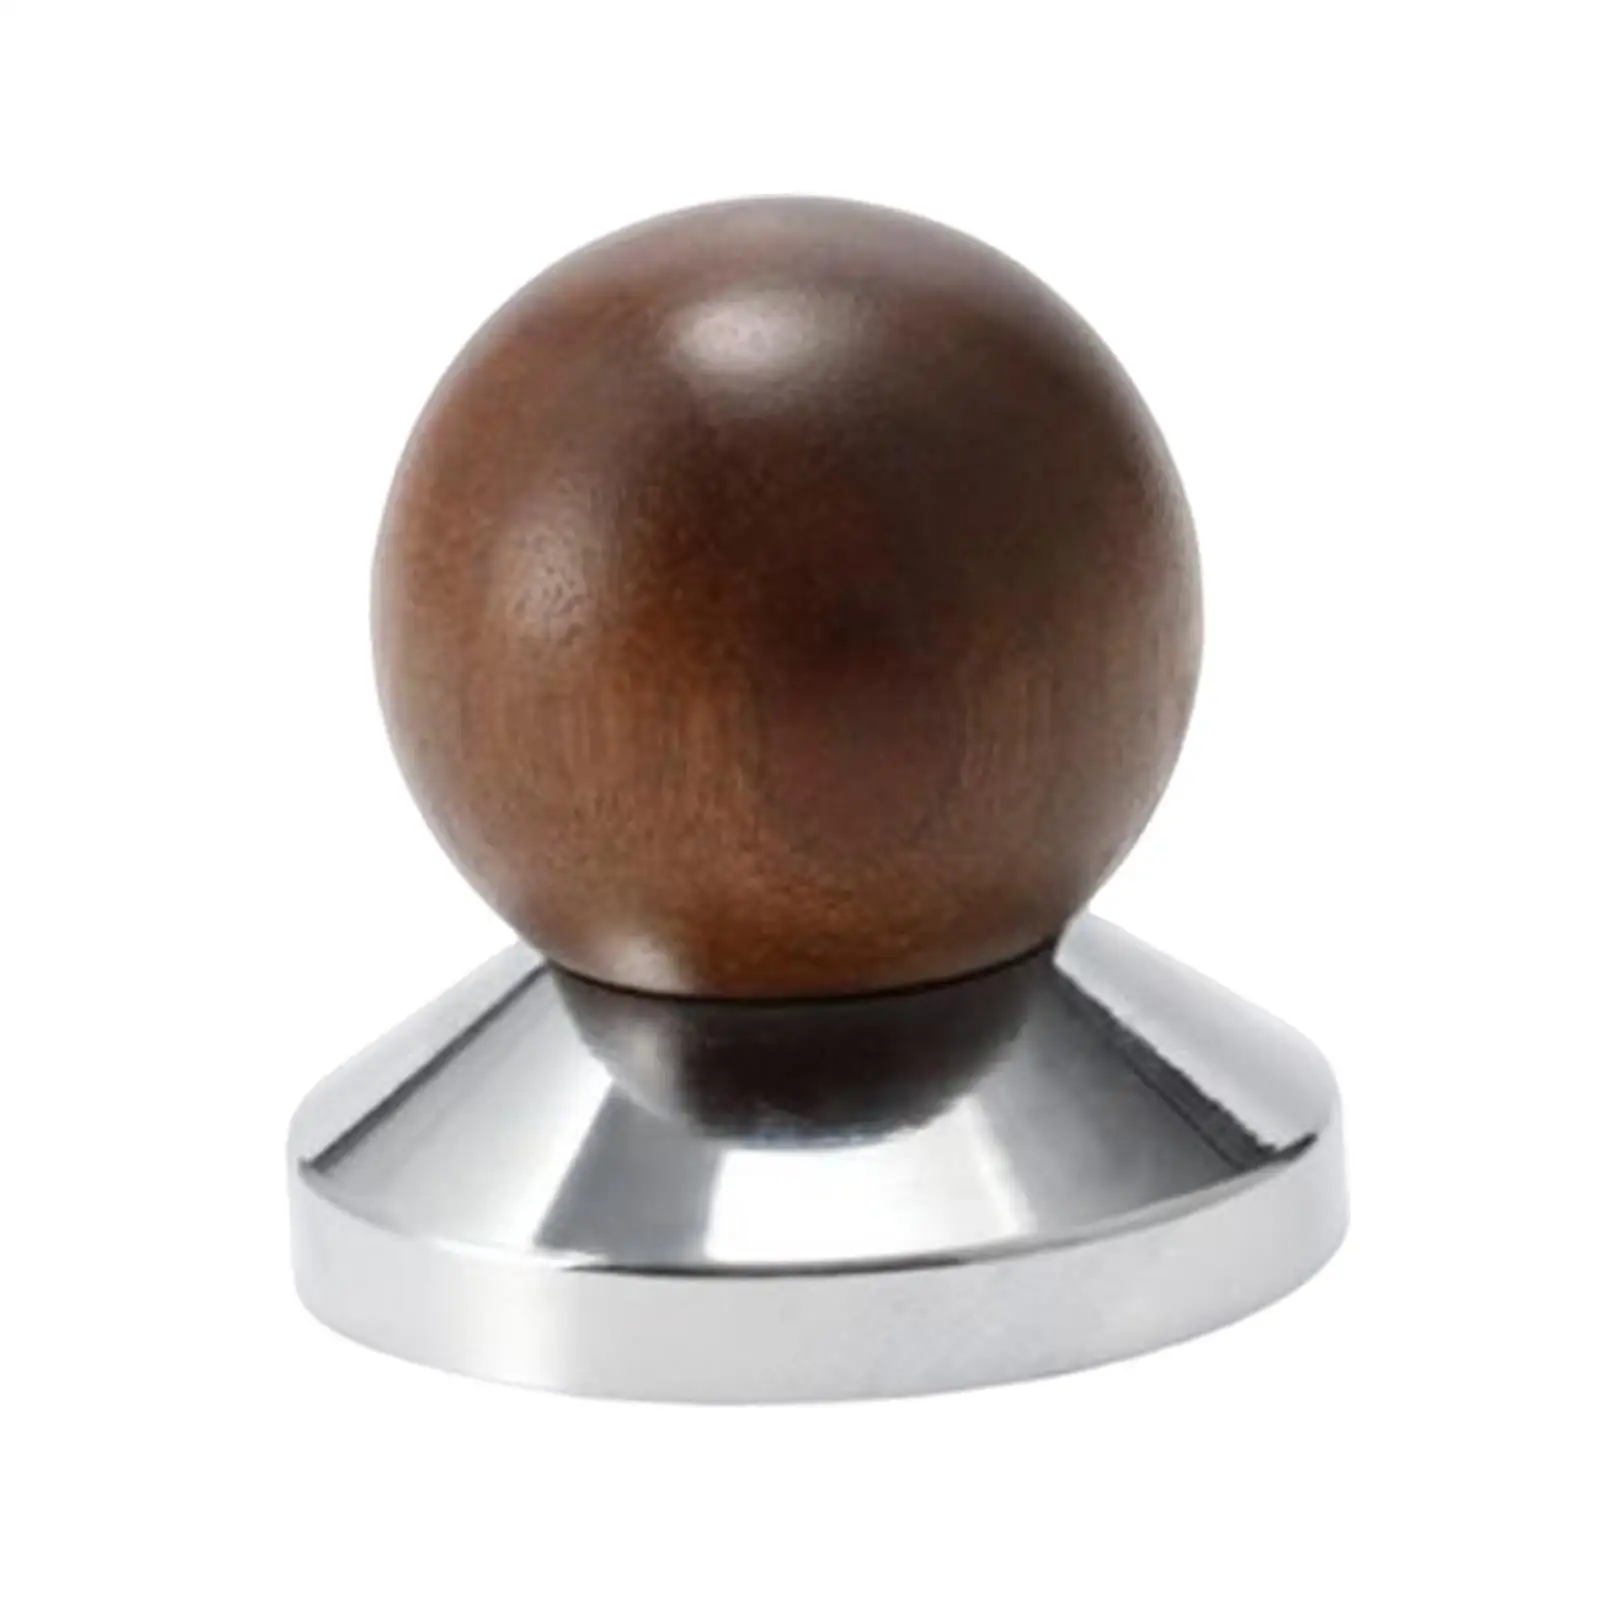 Professional Espresso Tamper/ Solid Wood Espresso Machine Accessory Flat Base Distributor/ Coffee Tamp Tool/ Home Cafe